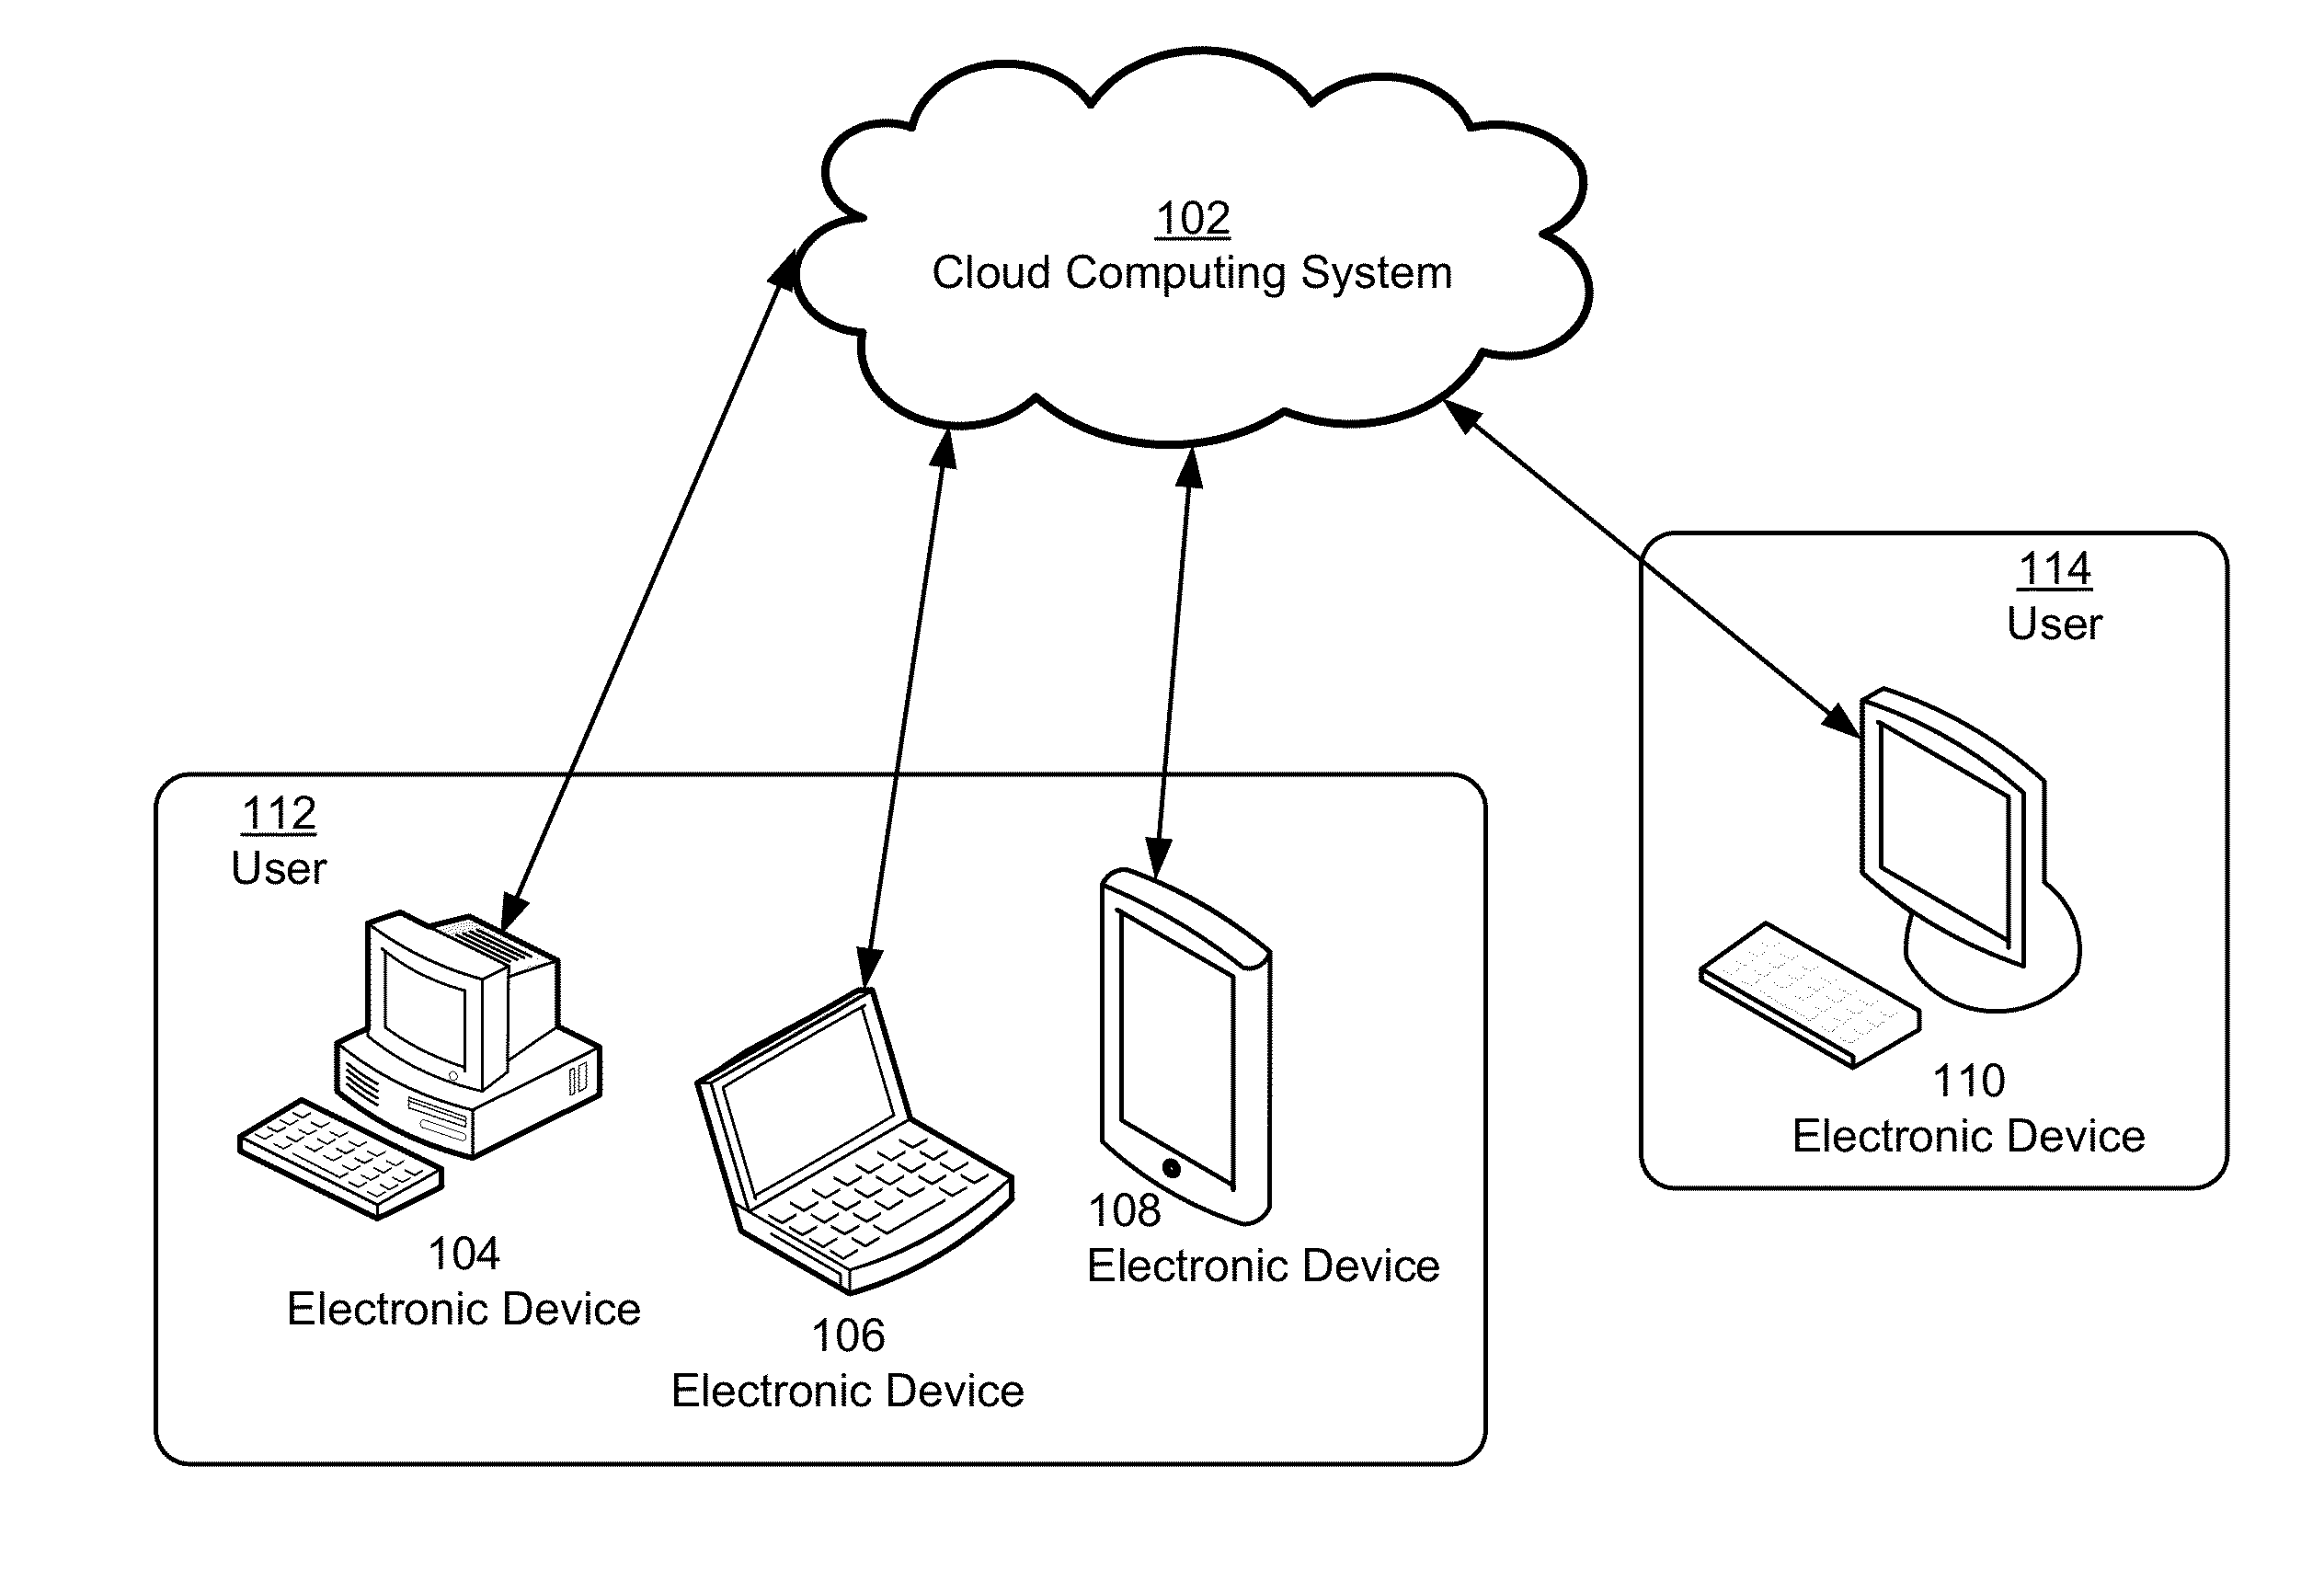 Sharing and synchronizing data across users of cloud computing systems